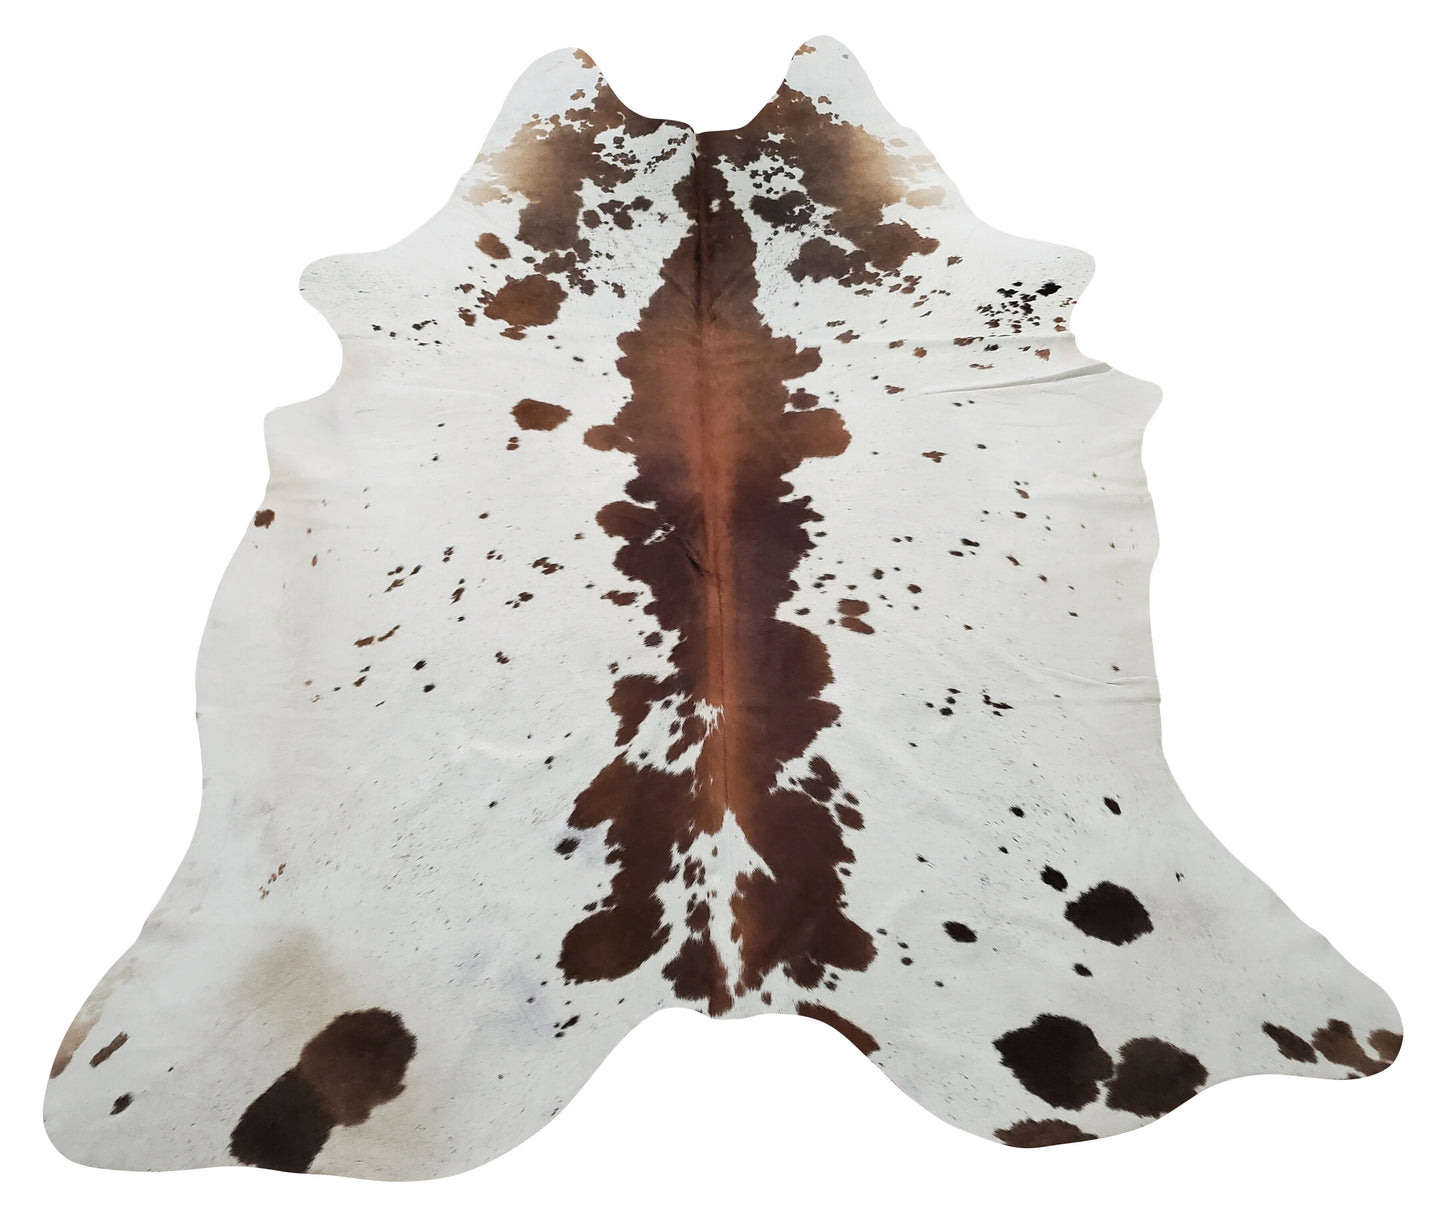 If you think you want one extra-large cowhide rug that’s the one to buy, you will enjoy looking at it every time, gives the room a special character